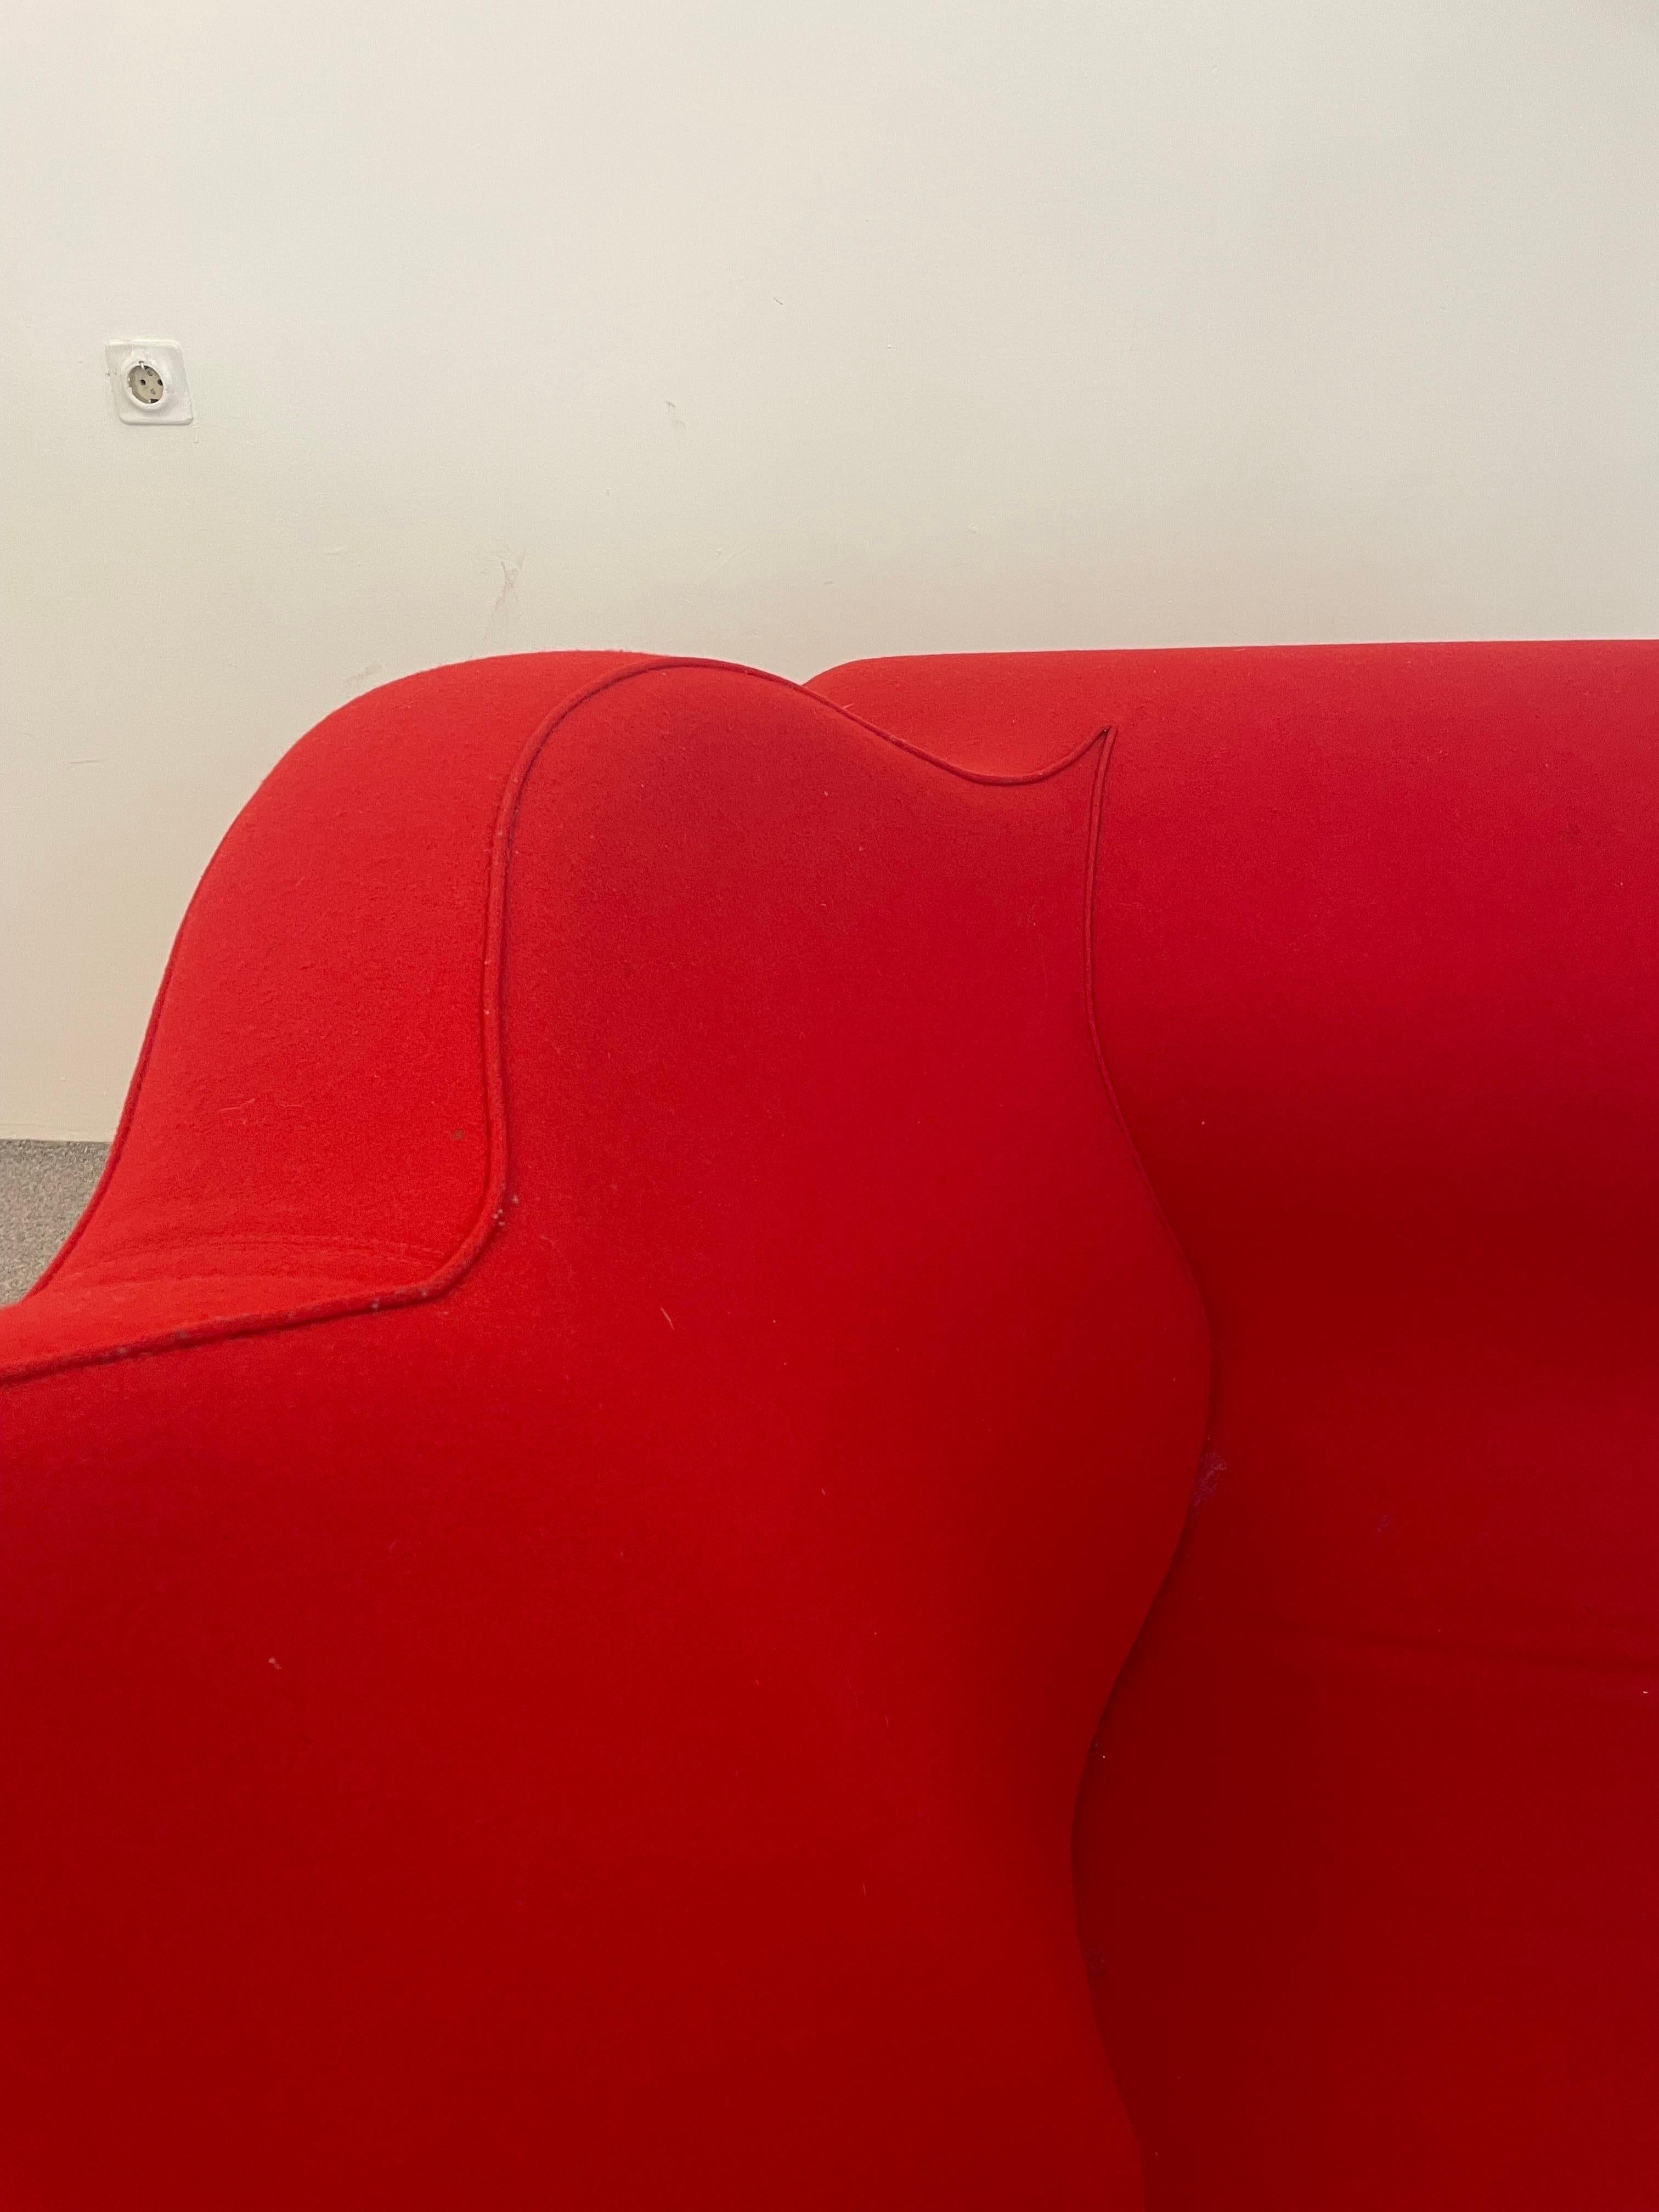 Double Soft Big Easy Sofa by Ron Arad, 1991 Moroso, Italy For Sale 4